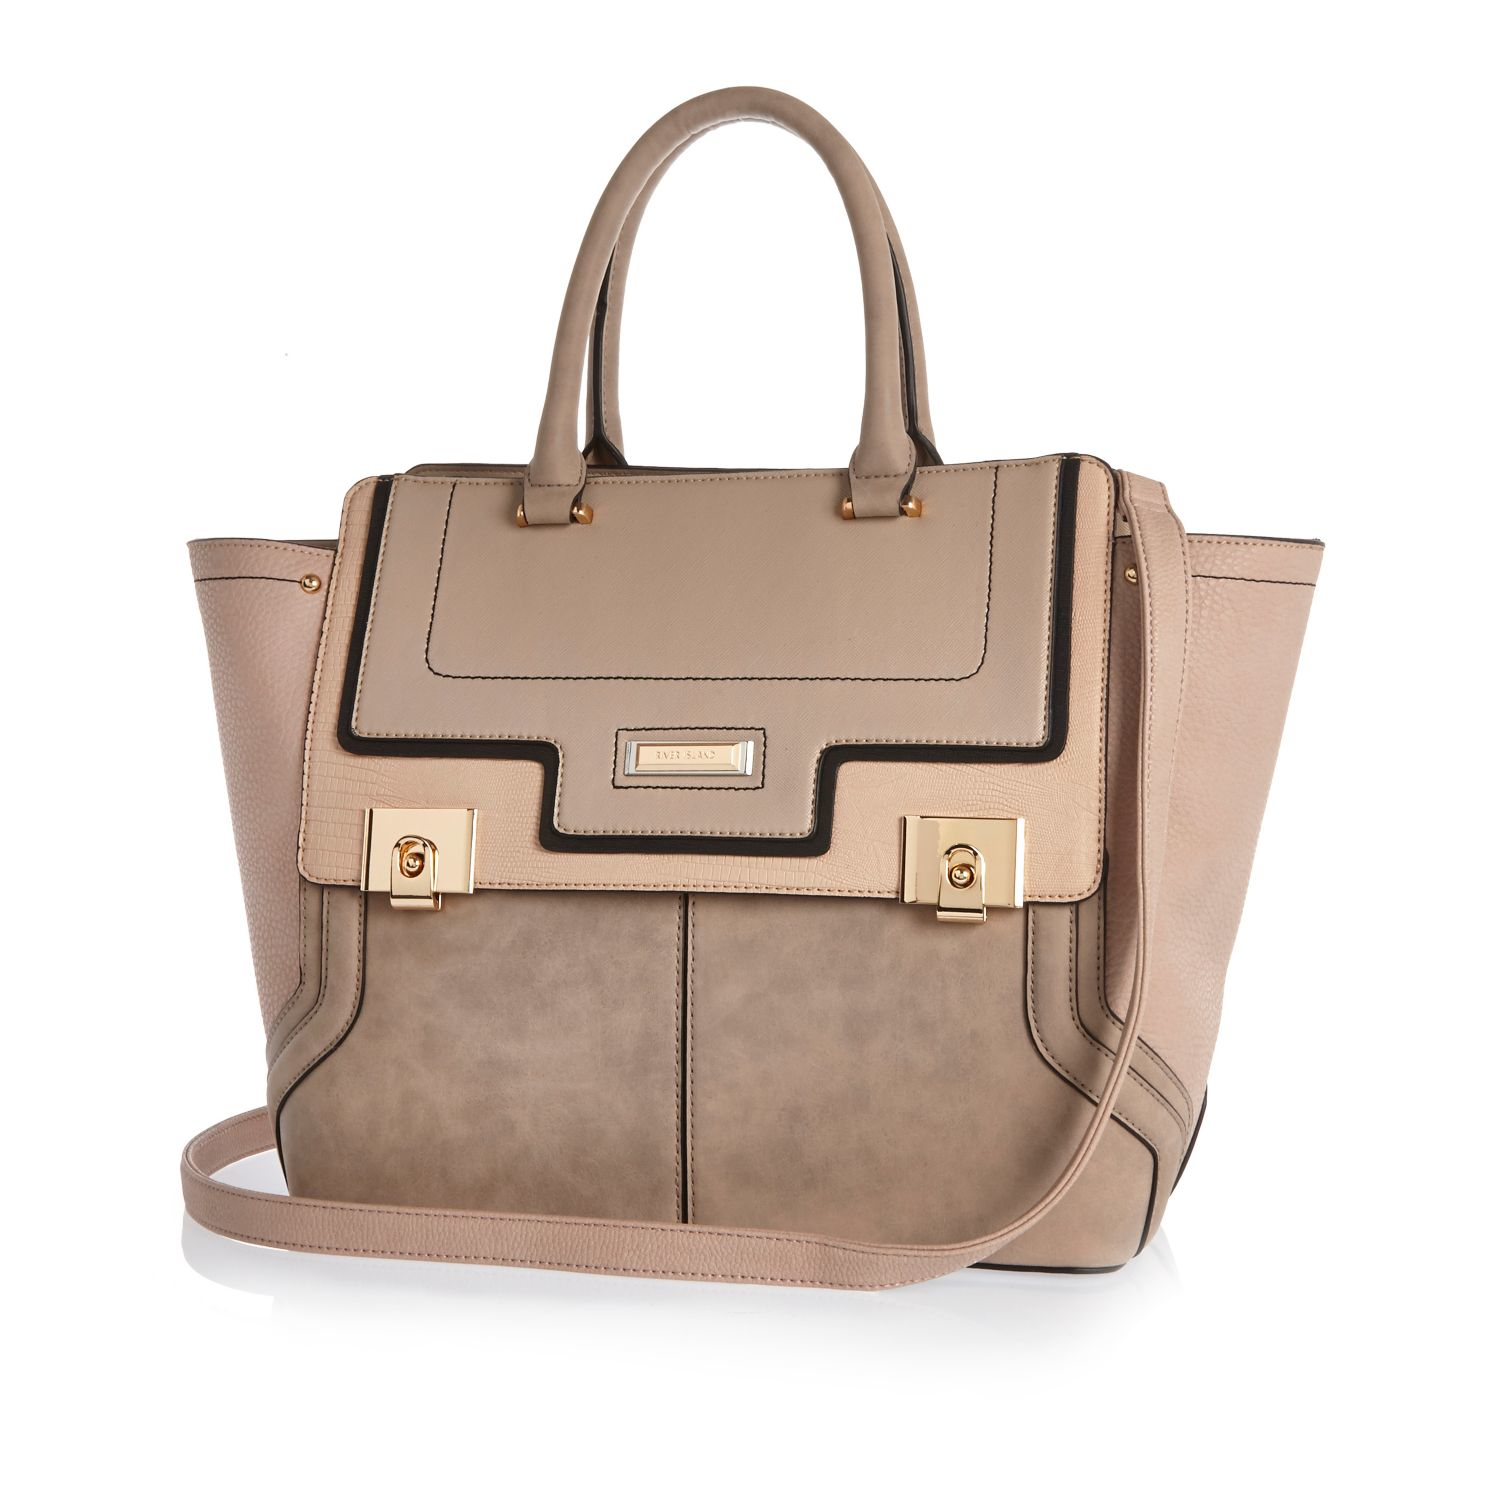 River Island Brown Paneled Double Lock Tote Bag in Brown - Lyst